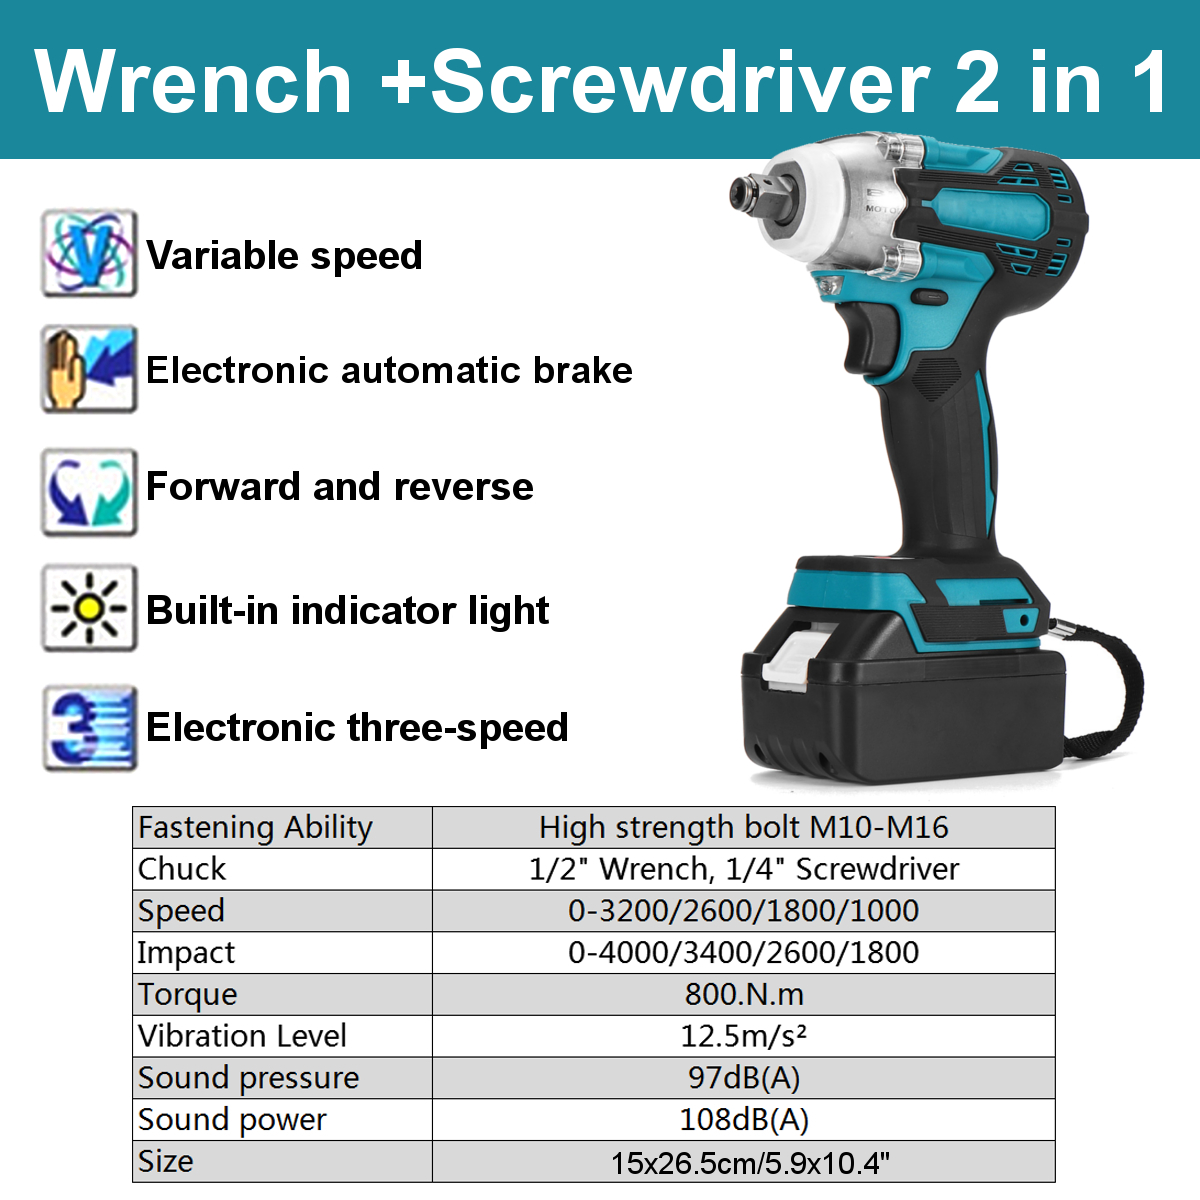 Drillpro-2-in1-18V-800Nm-Electric-Wrench-Screwdriver-Brushless-Cordless-Electric-12Wrench-14Screwdri-1806148-12